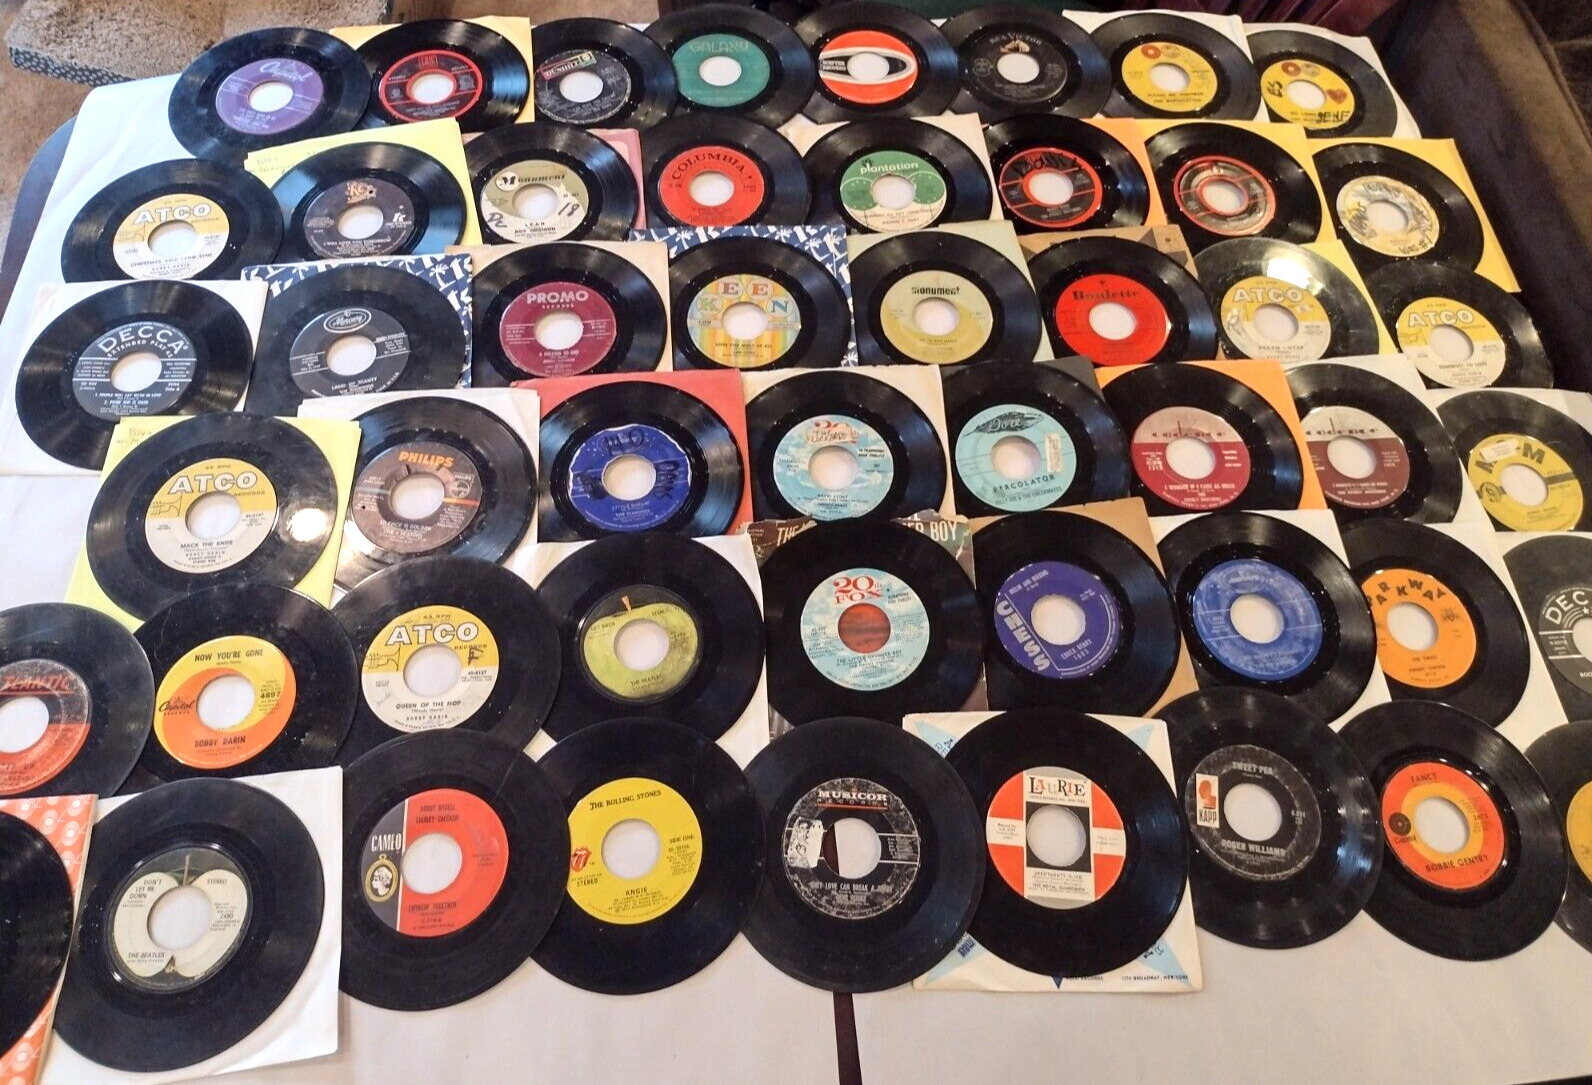 Lot 6 of  50 Records  50s 60s 70s 45 rpm Various artists and Labels See photos